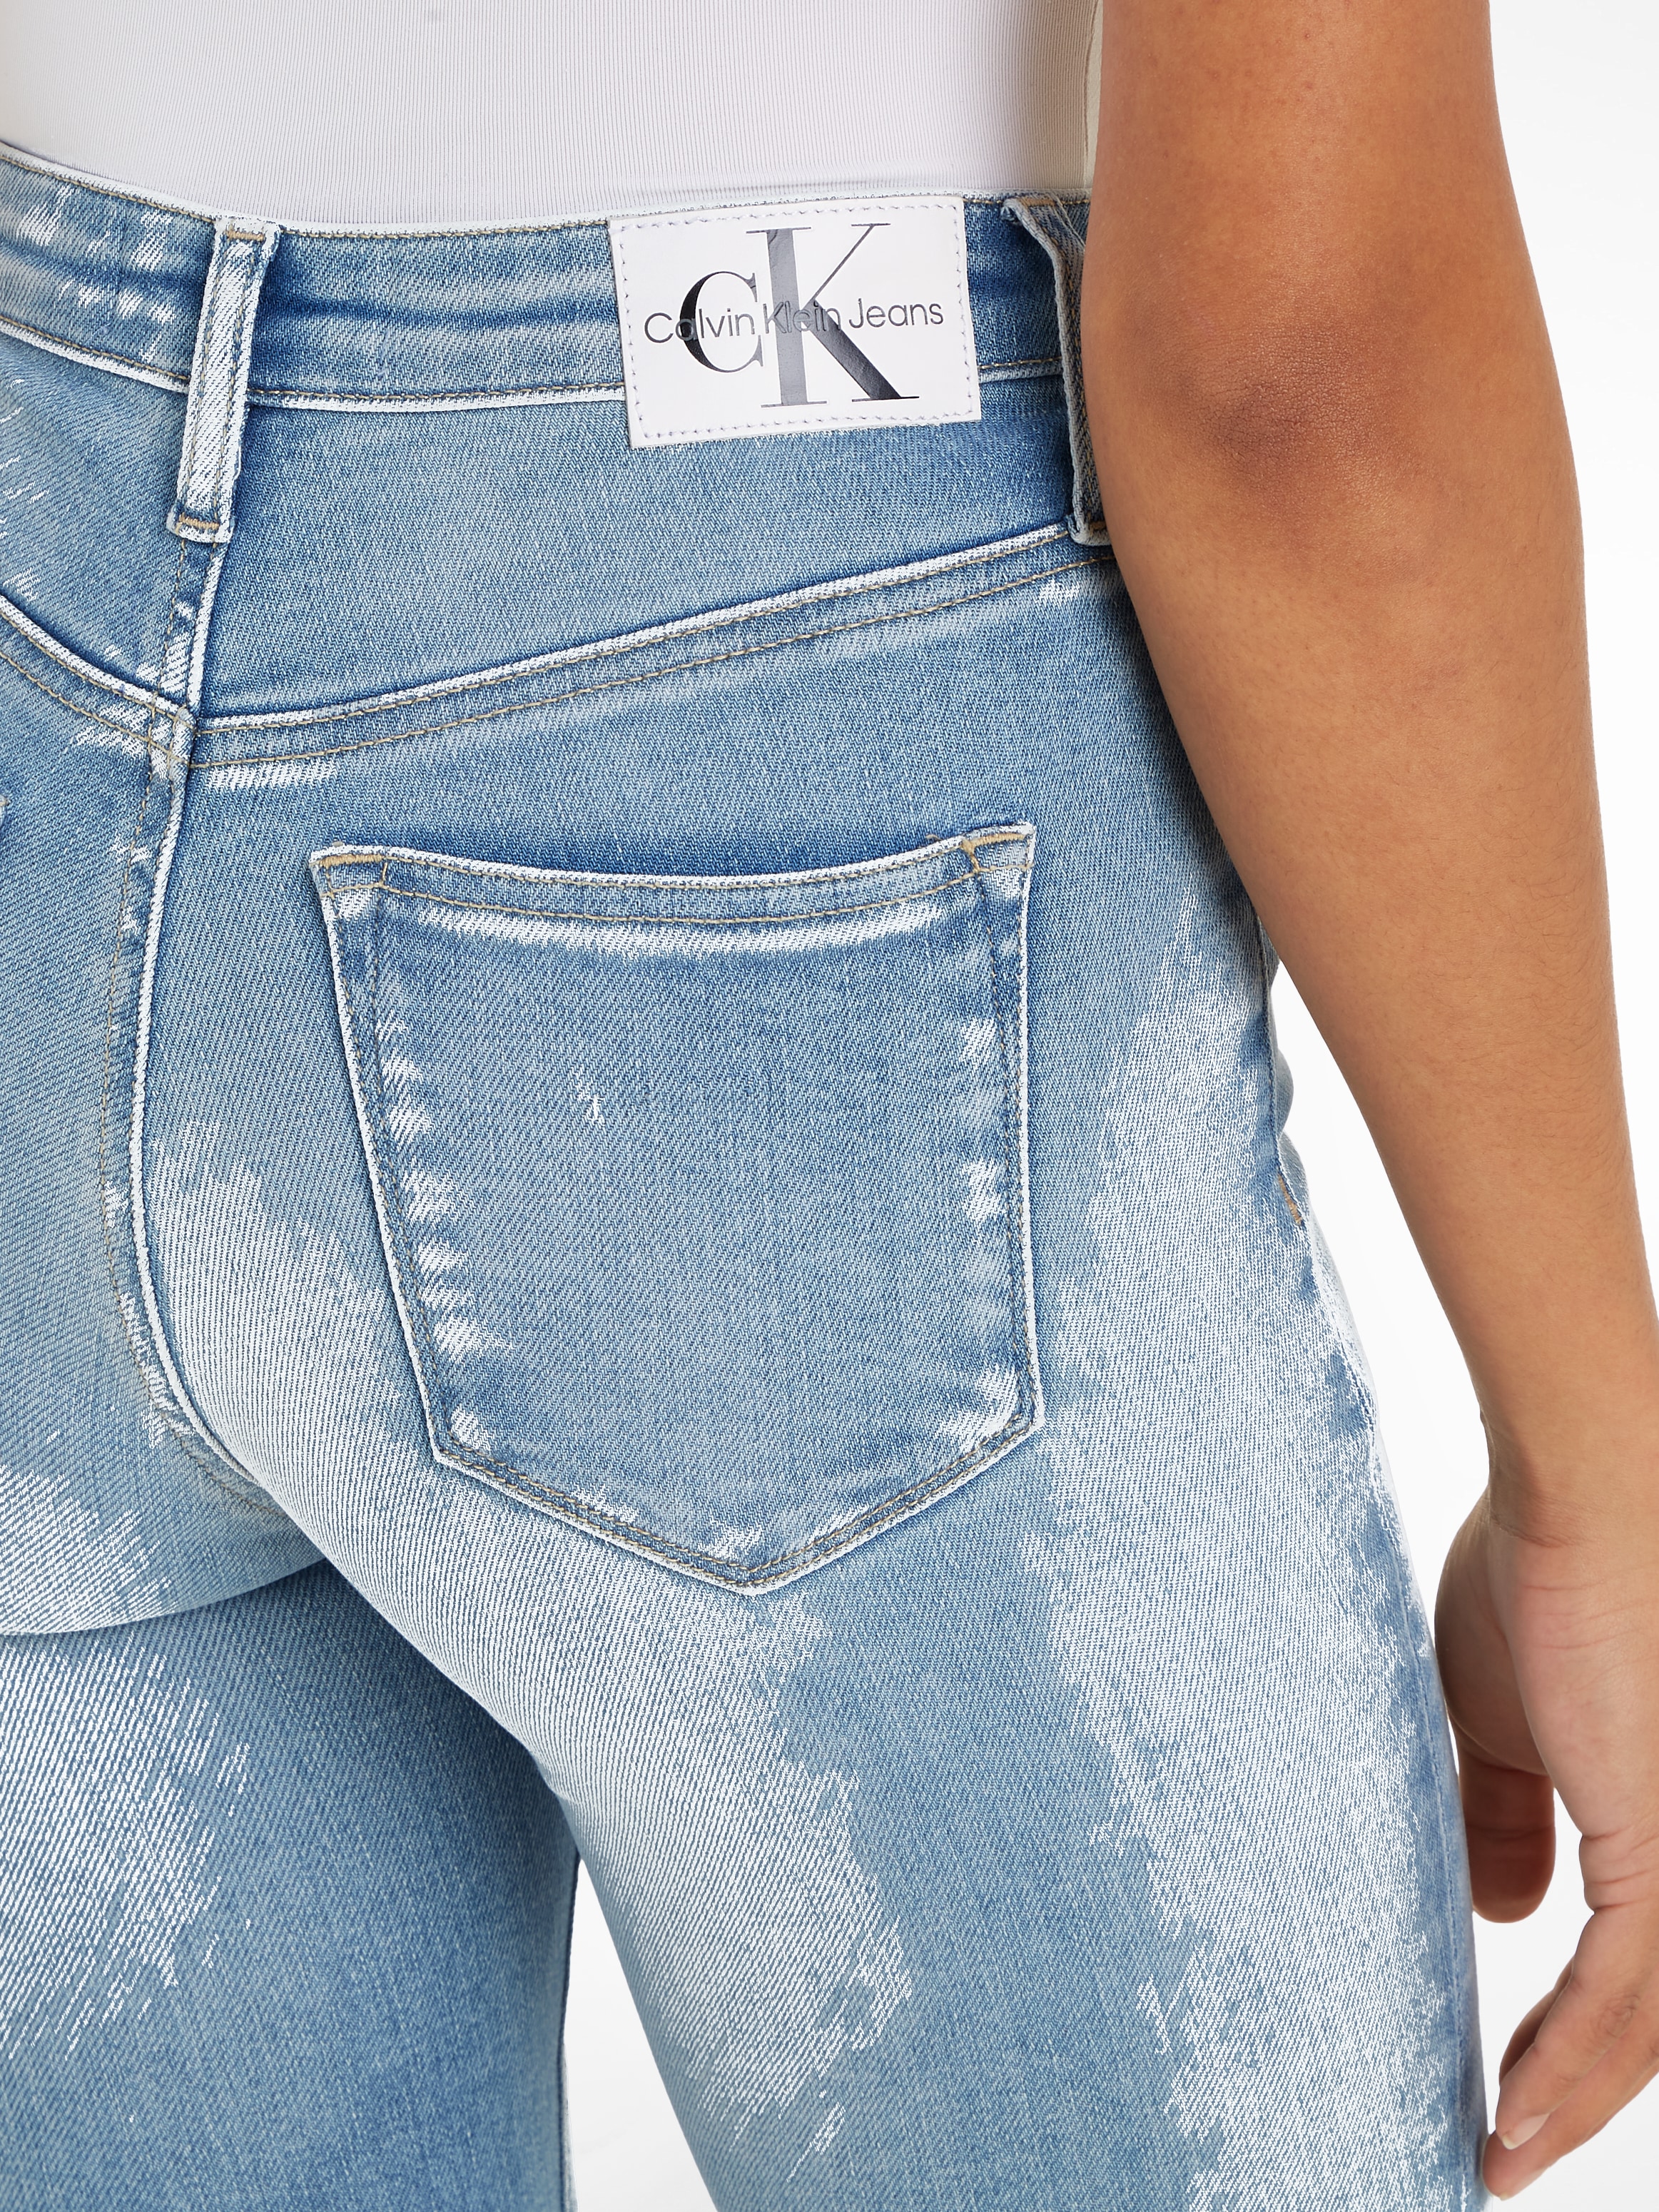 Calvin Klein Jeans Skinny-fit-Jeans »HIGH RISE SKINNY«, mit Markenlabel